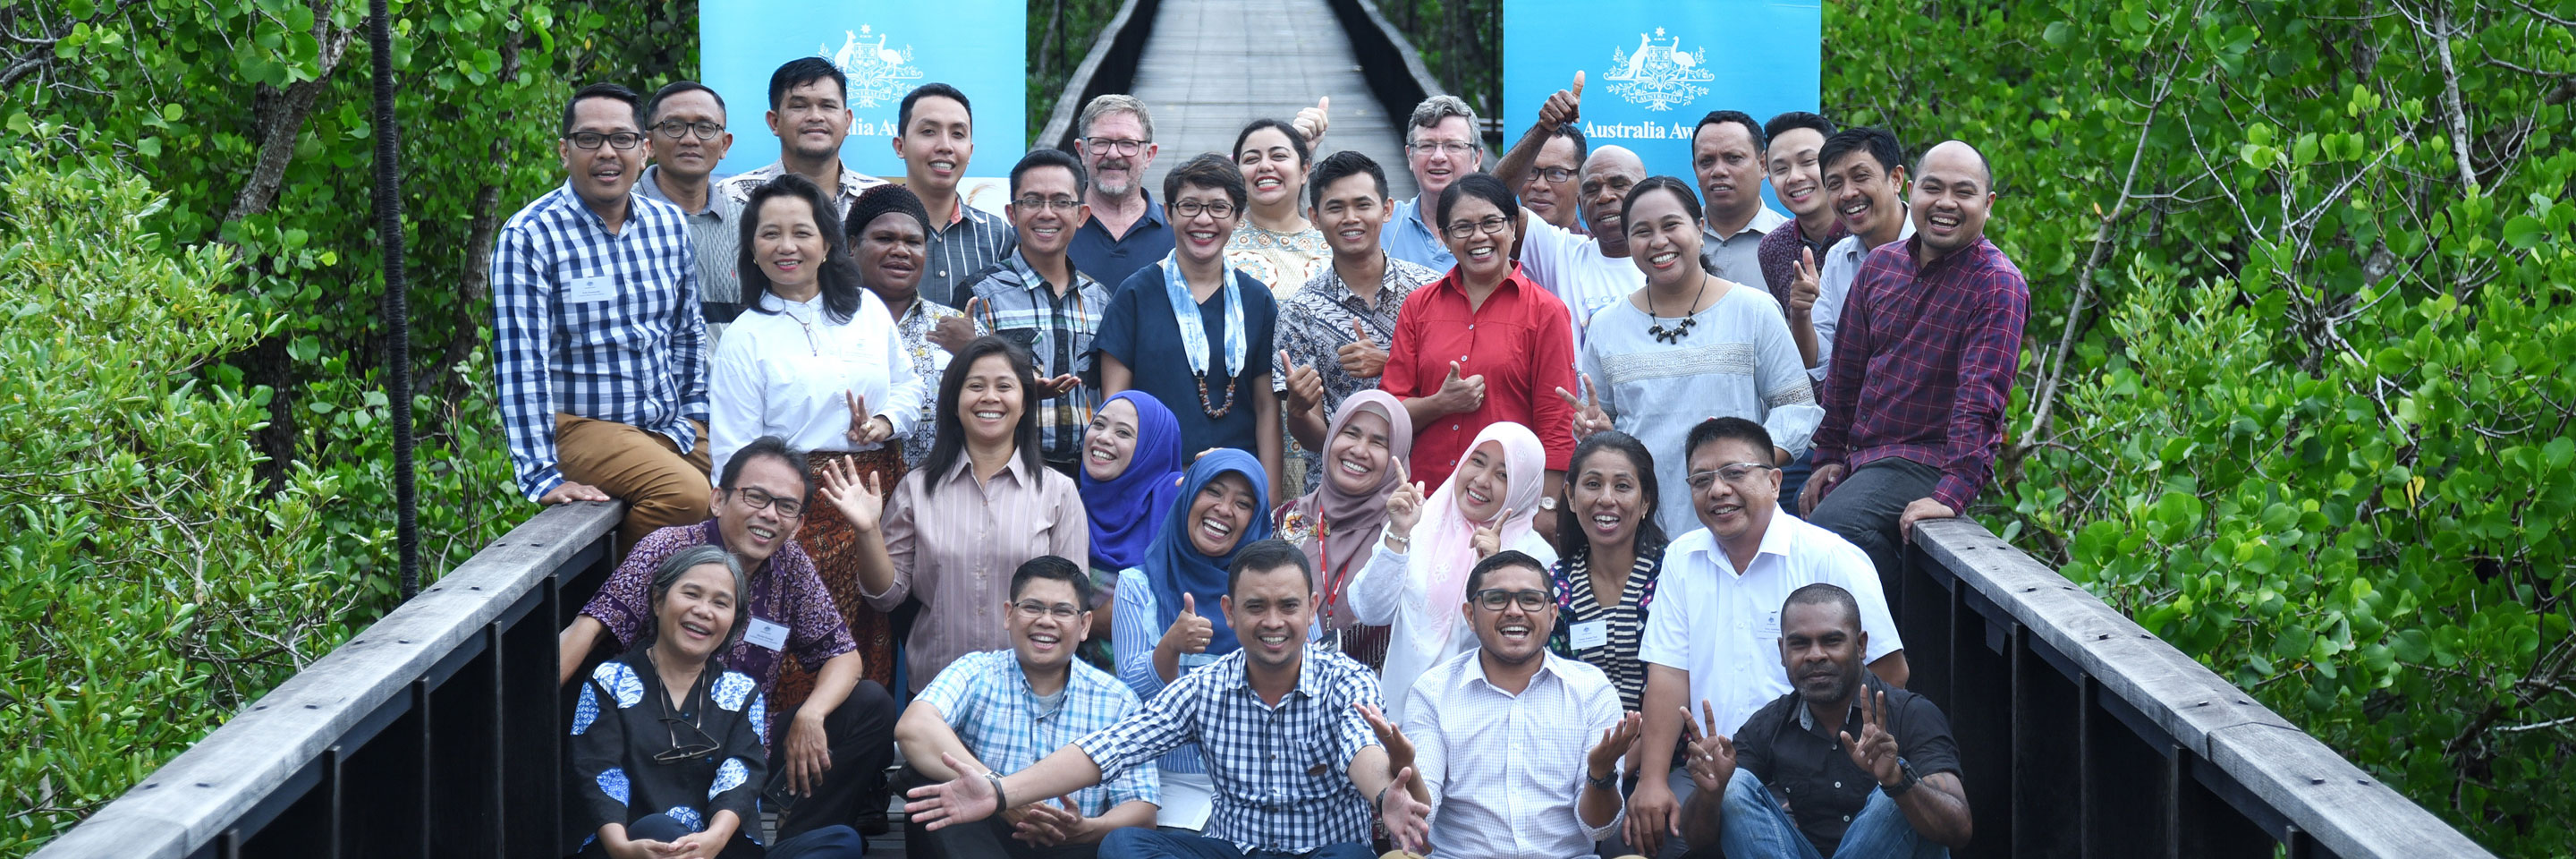 Tourism practitioners and policy makers from Eastern Indonesia participate in Sustainable Tourism for Regional Growth short course to improve linkages between tourism stakeholders and enhance business planning process.